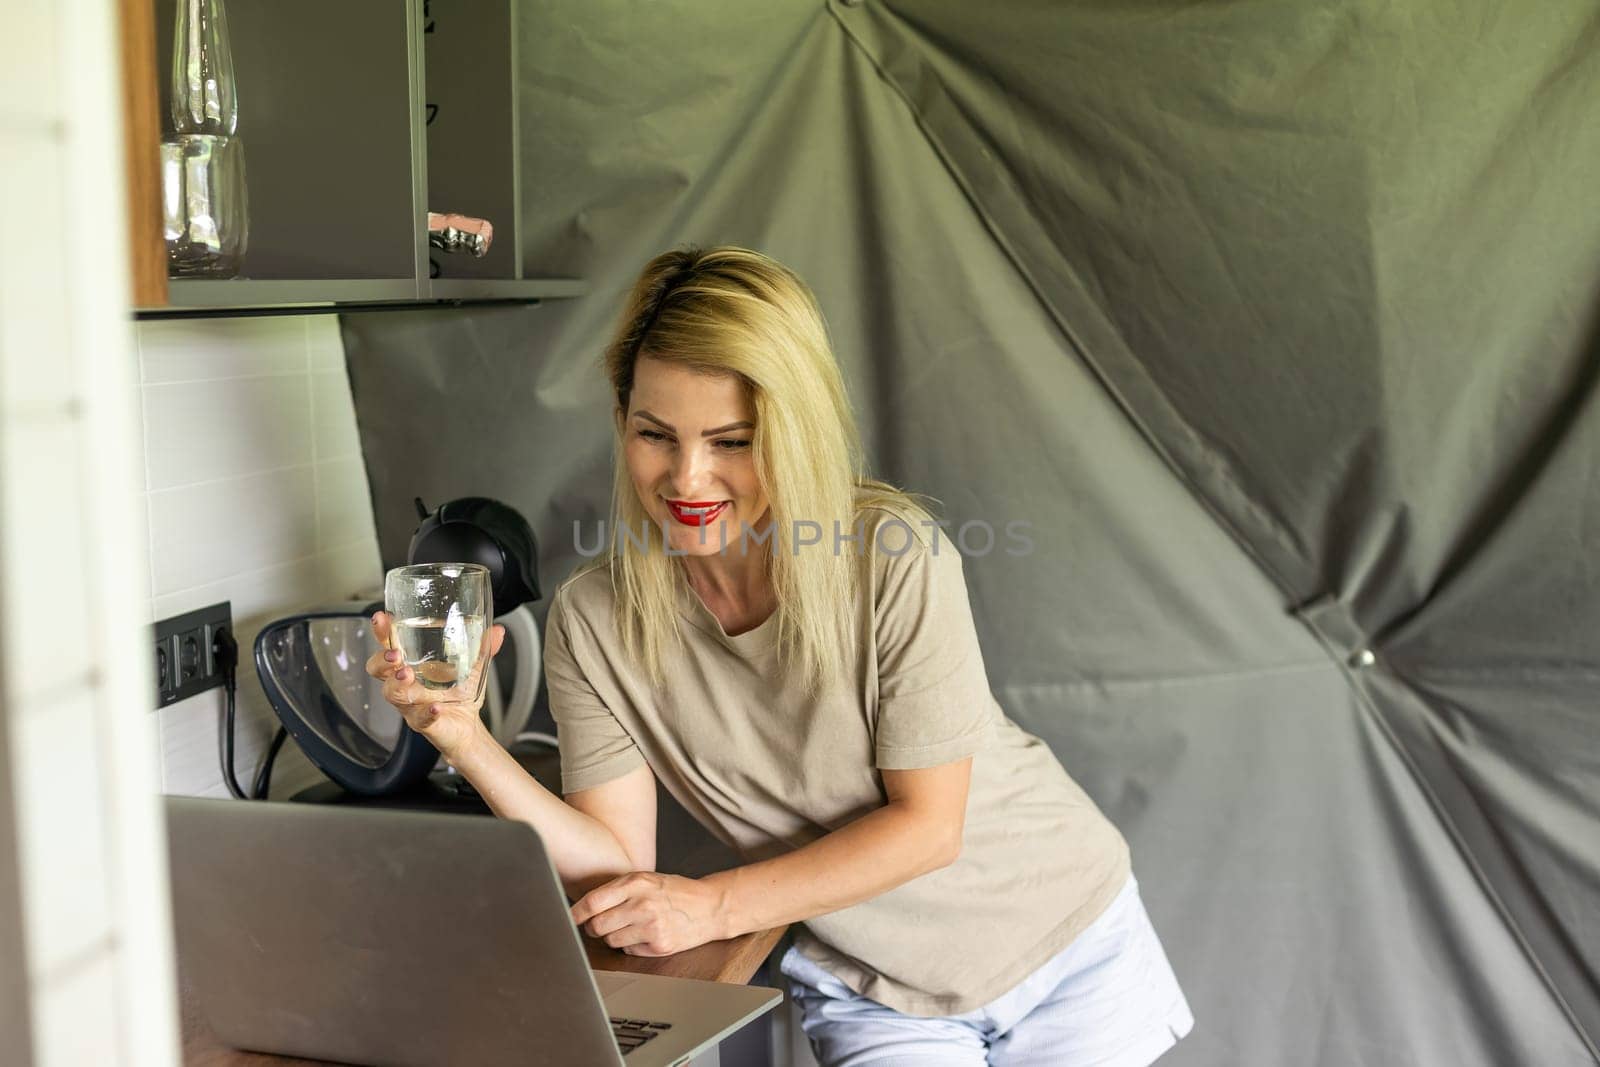 Young blonde woman with long hair using laptop in a kitchen by Andelov13